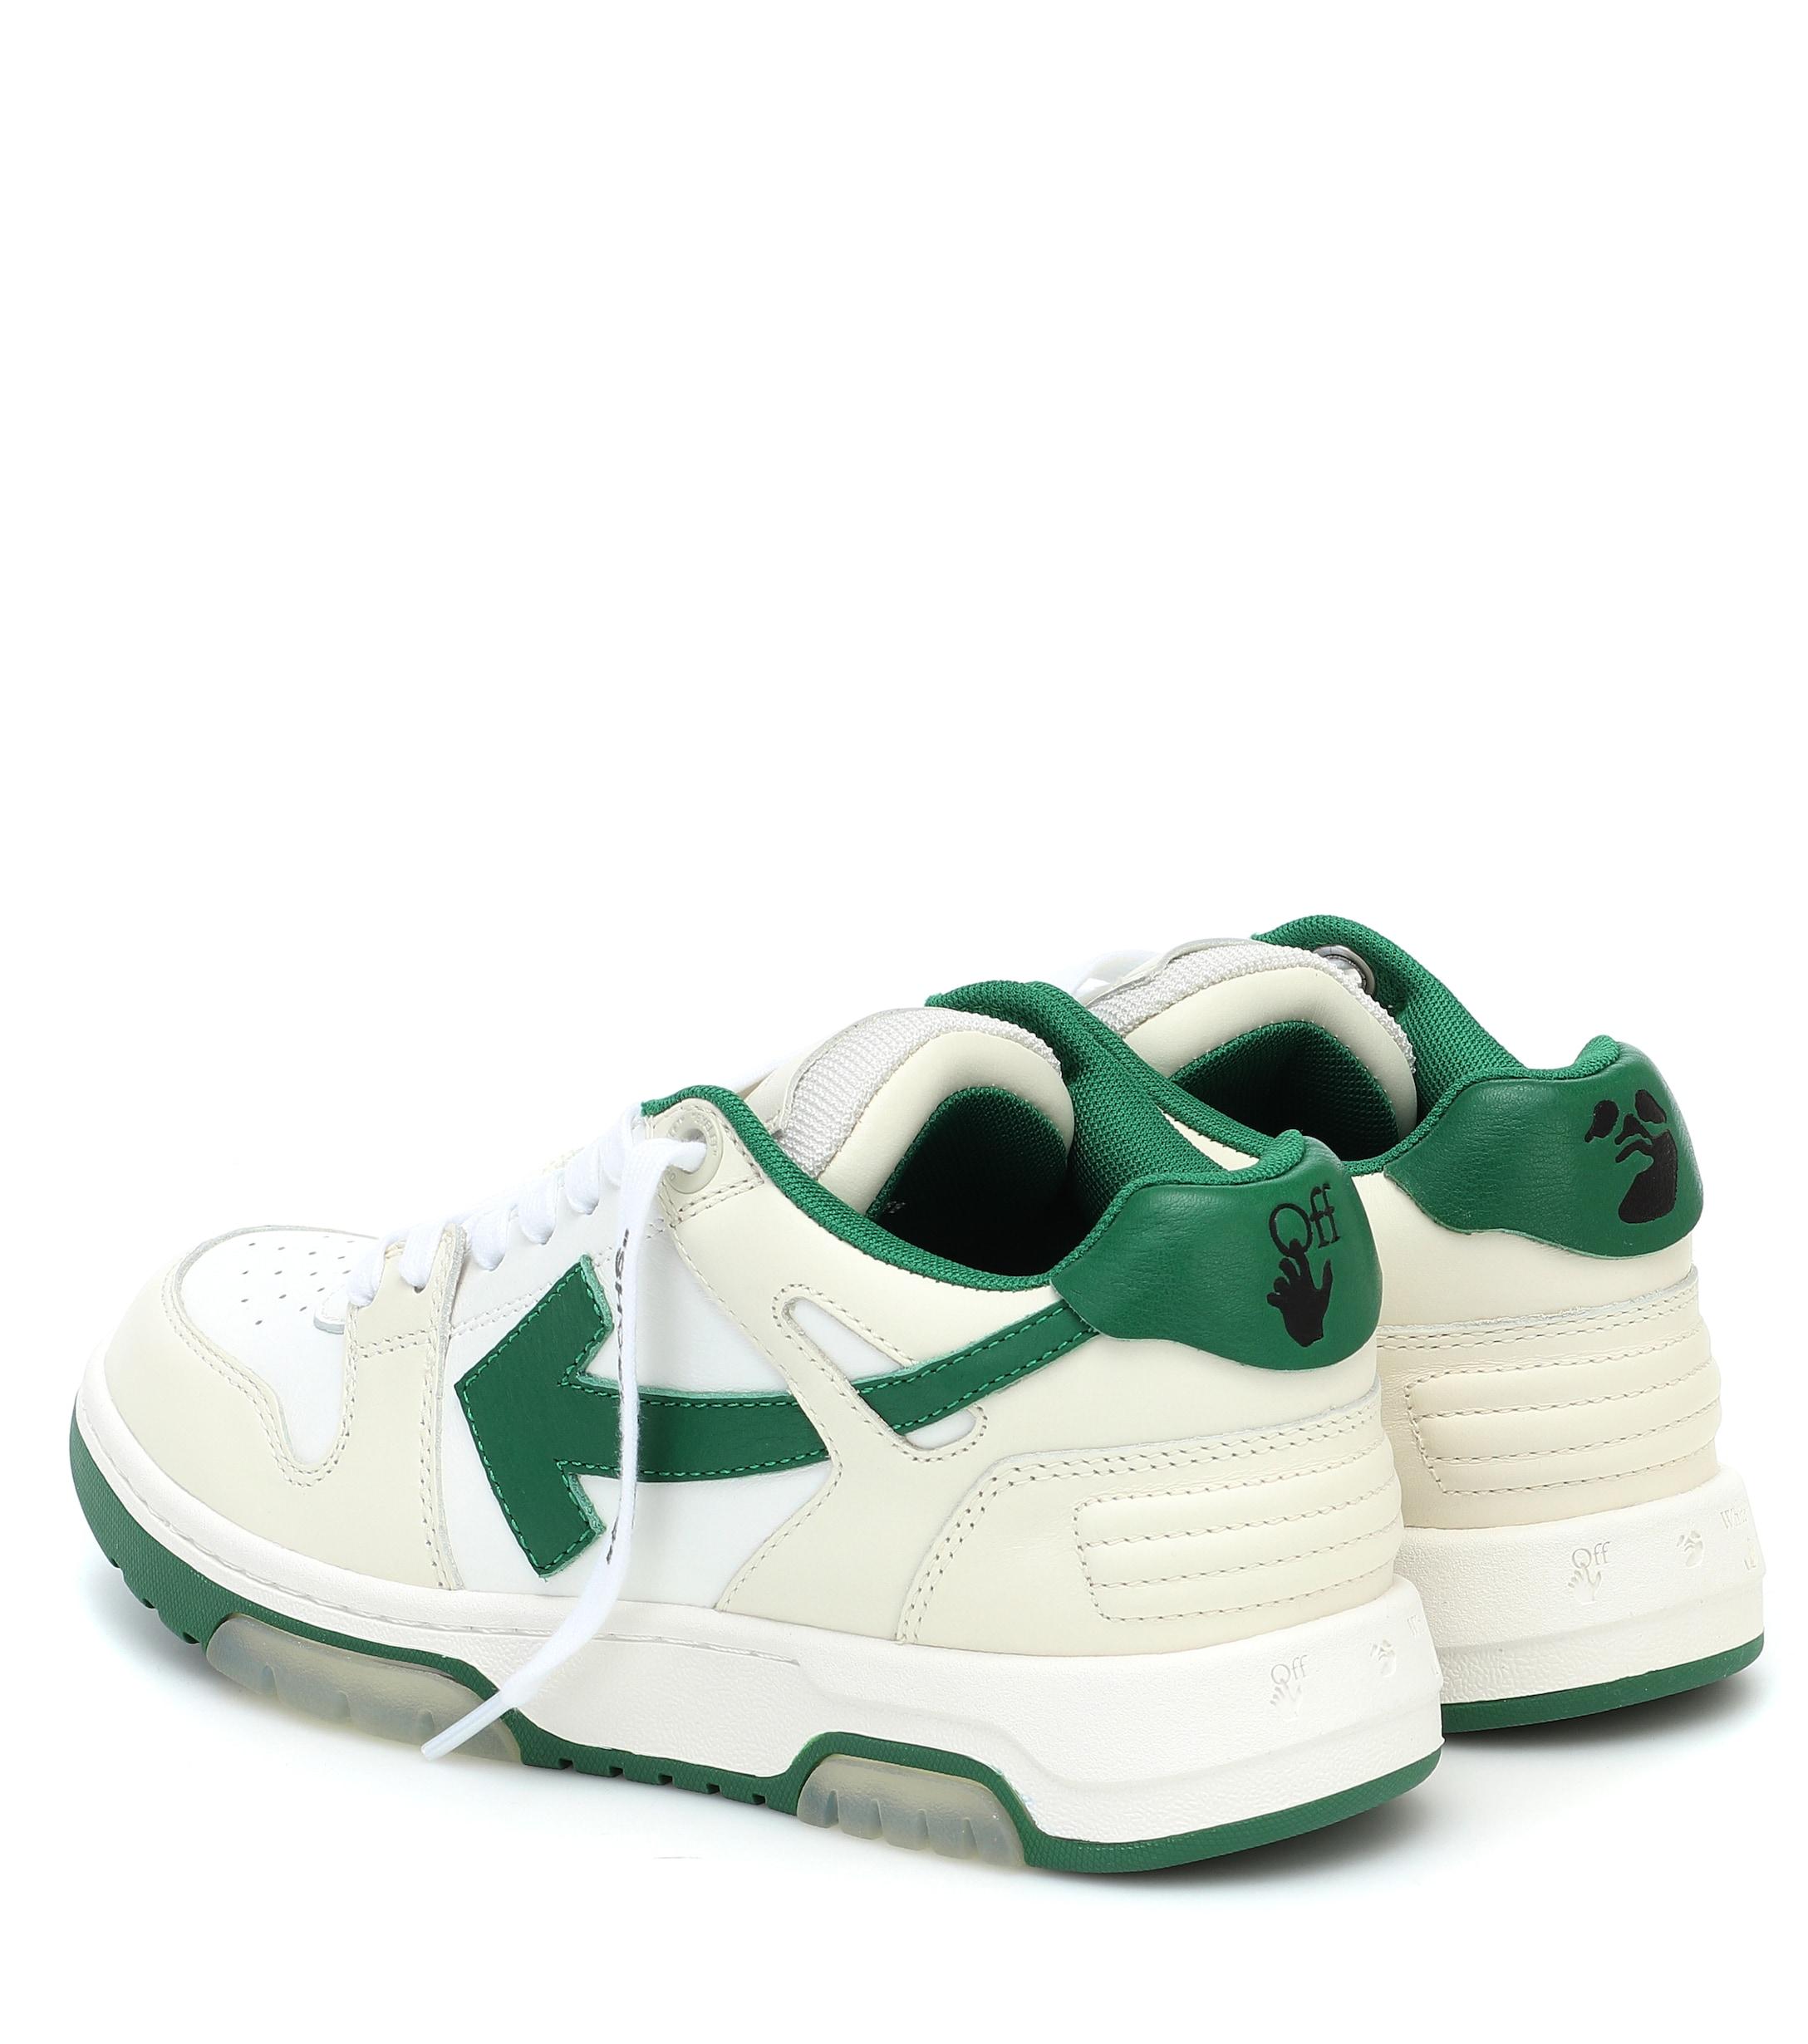 Off-White c/o Virgil Abloh Ooo Out Of Office Leather Sneakers in 